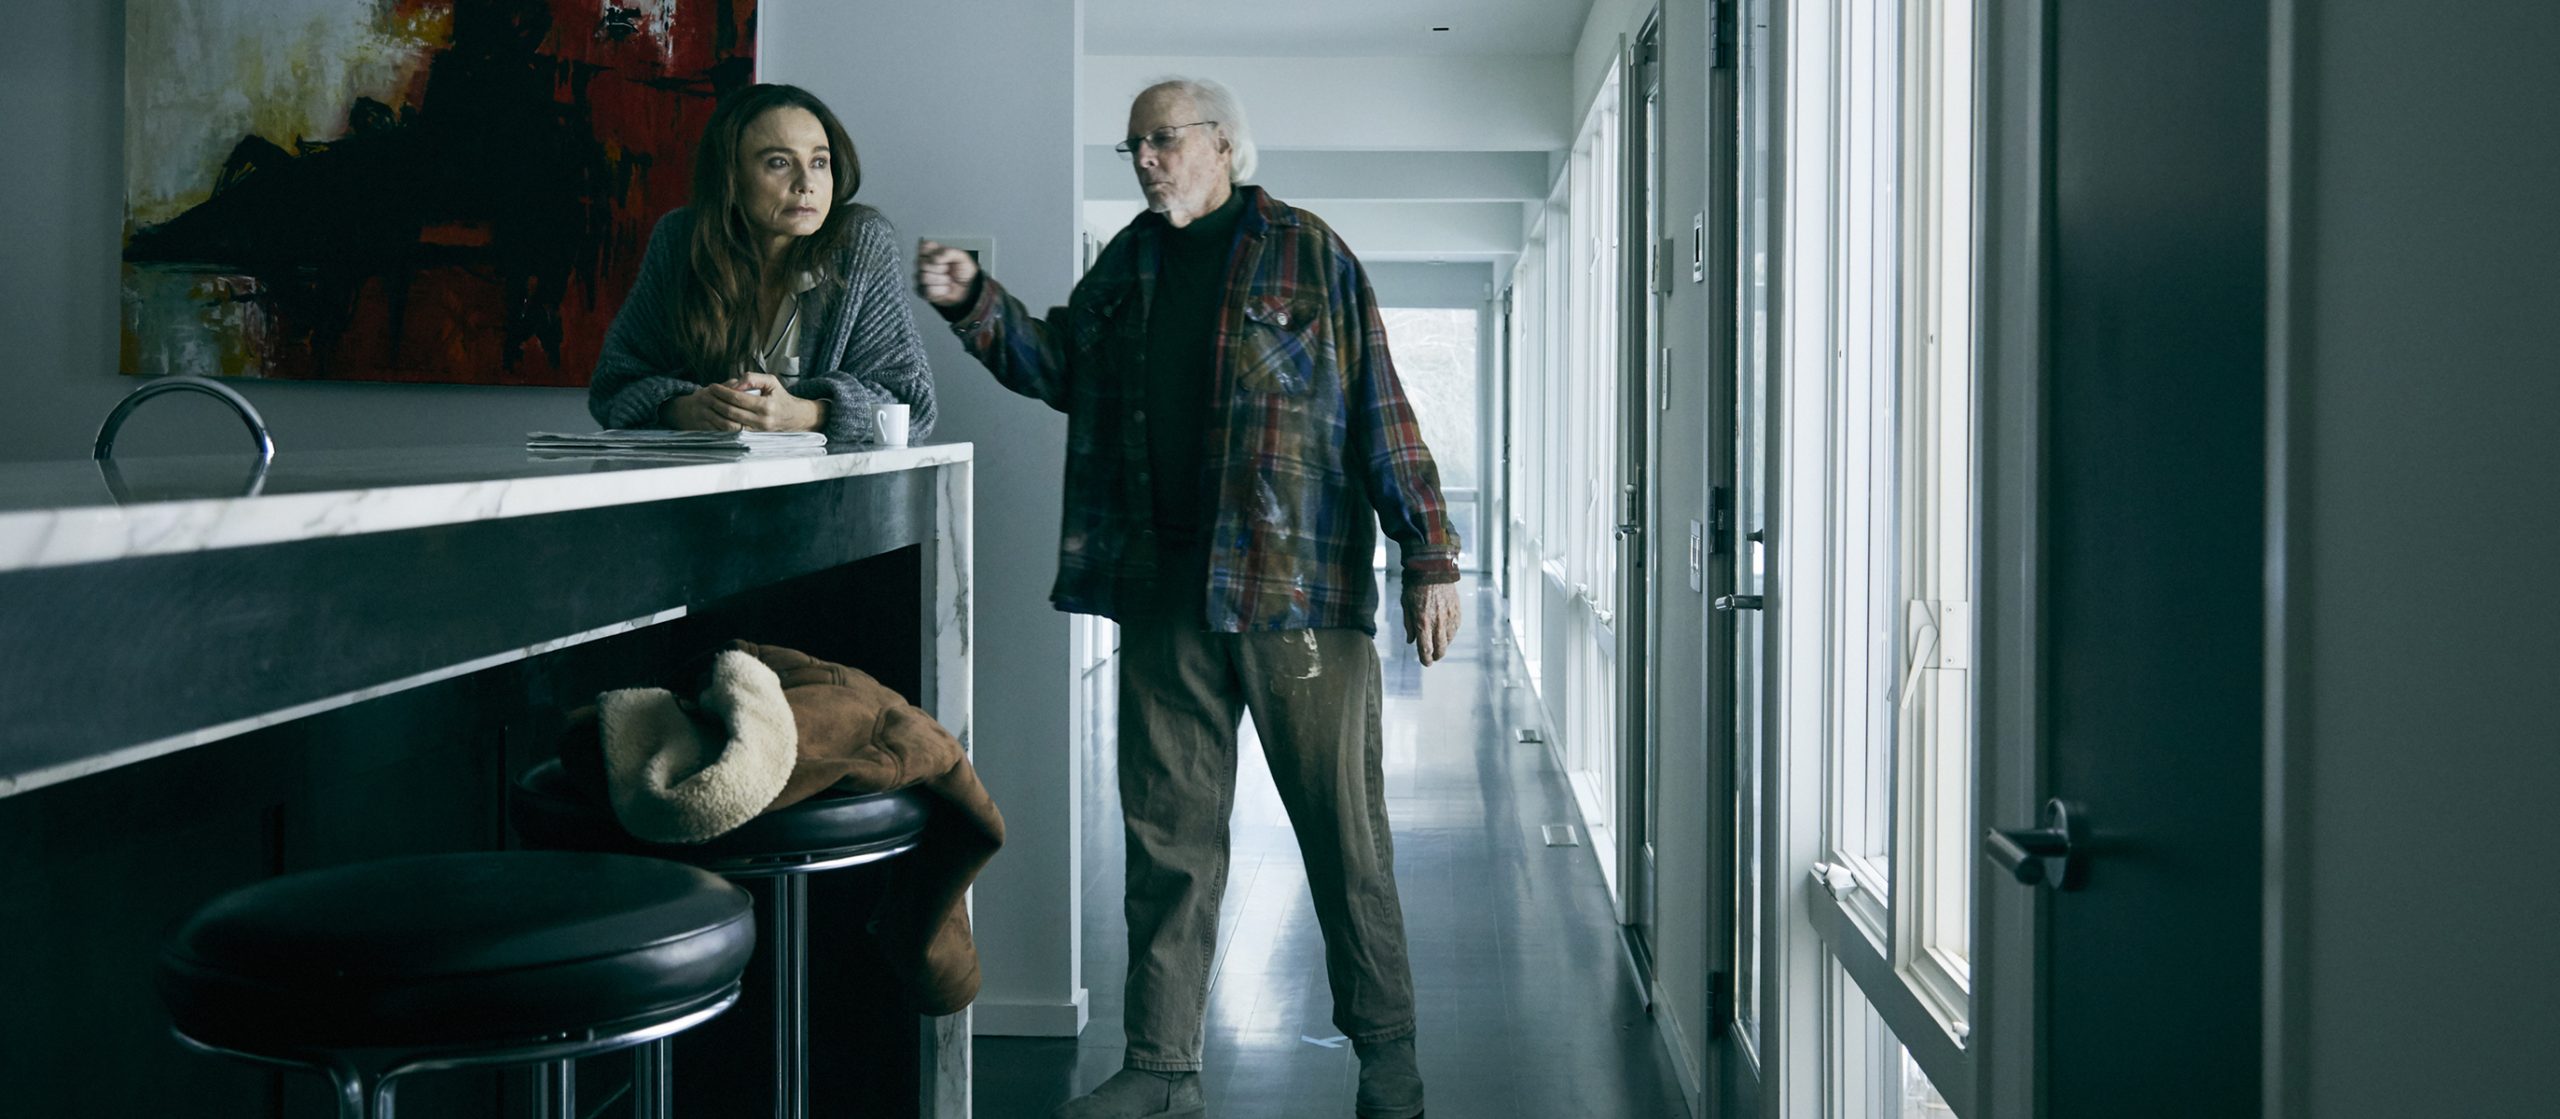 Claire (Lena Olin) and Richard (Bruce Dern) in their morning routine in THE ARTIST’S WIFE. Photo by Michael Lavine.